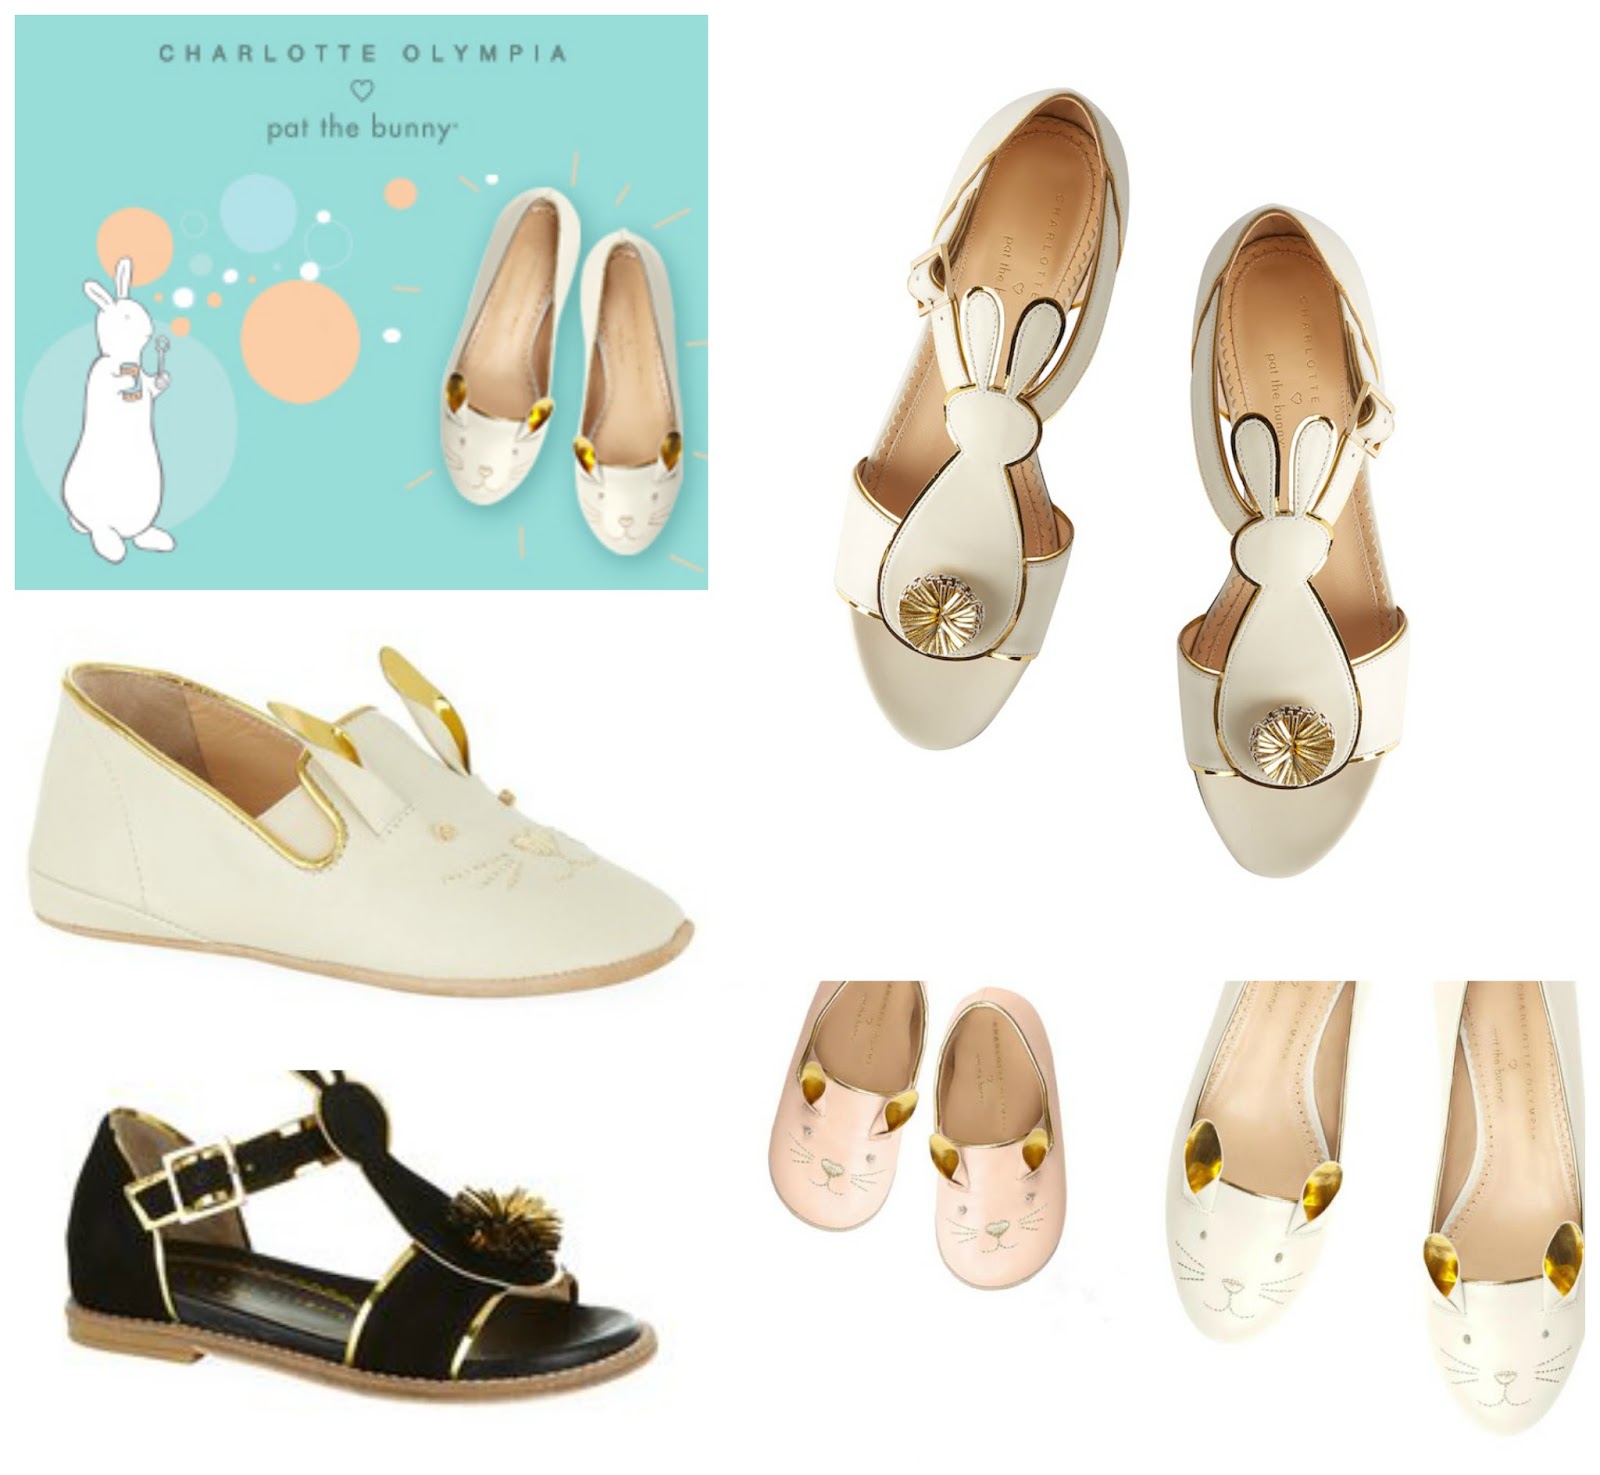 mamasVIB | V. I. BUYS: Have you met Romy and the Bunnies? …and Aden + Anais GIVEAWAY | aden + anais | exclusive collection | romy and the bunnies | julia restoin roitfeld | pat the bunny | book anniversary | giveaway competition | charlotte olympia | bon point | bunnies | bunny clothes designer collection | kids clothes | fashion | style |} carine roitfeld | french vogue | bunny | romy and bunnies | mummy bloggers | cool bloggers | model | french | exclusive brands | harrods | comp| fuse communications | mamasVIb | swaddles | baby collection | baby swaddles | muslins | pat the bunny book | class books | exclusive giveaway | mamas vib r